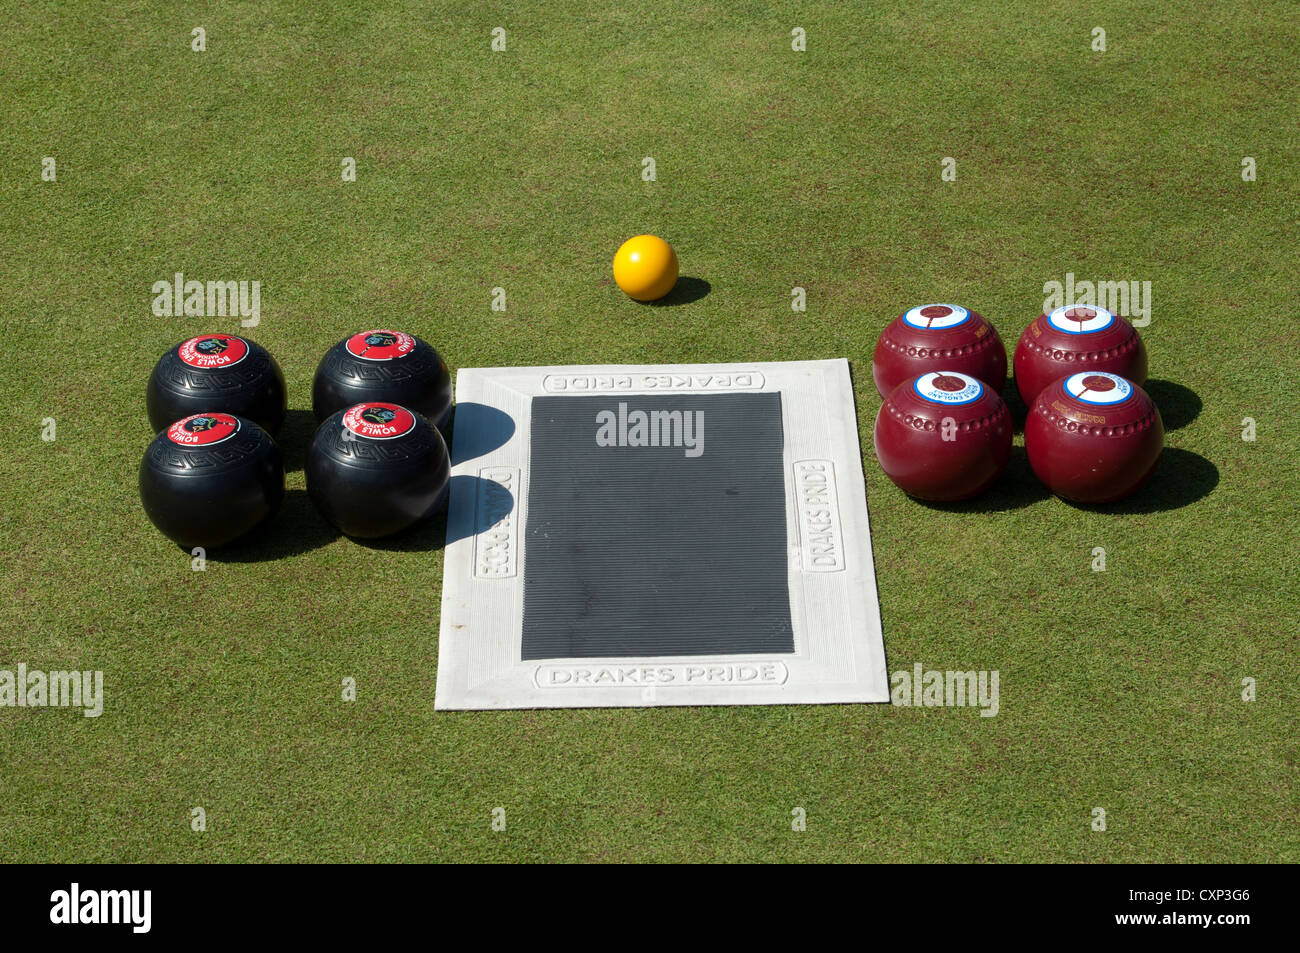 Lawn bowls and mat laid out before a match Stock Photo